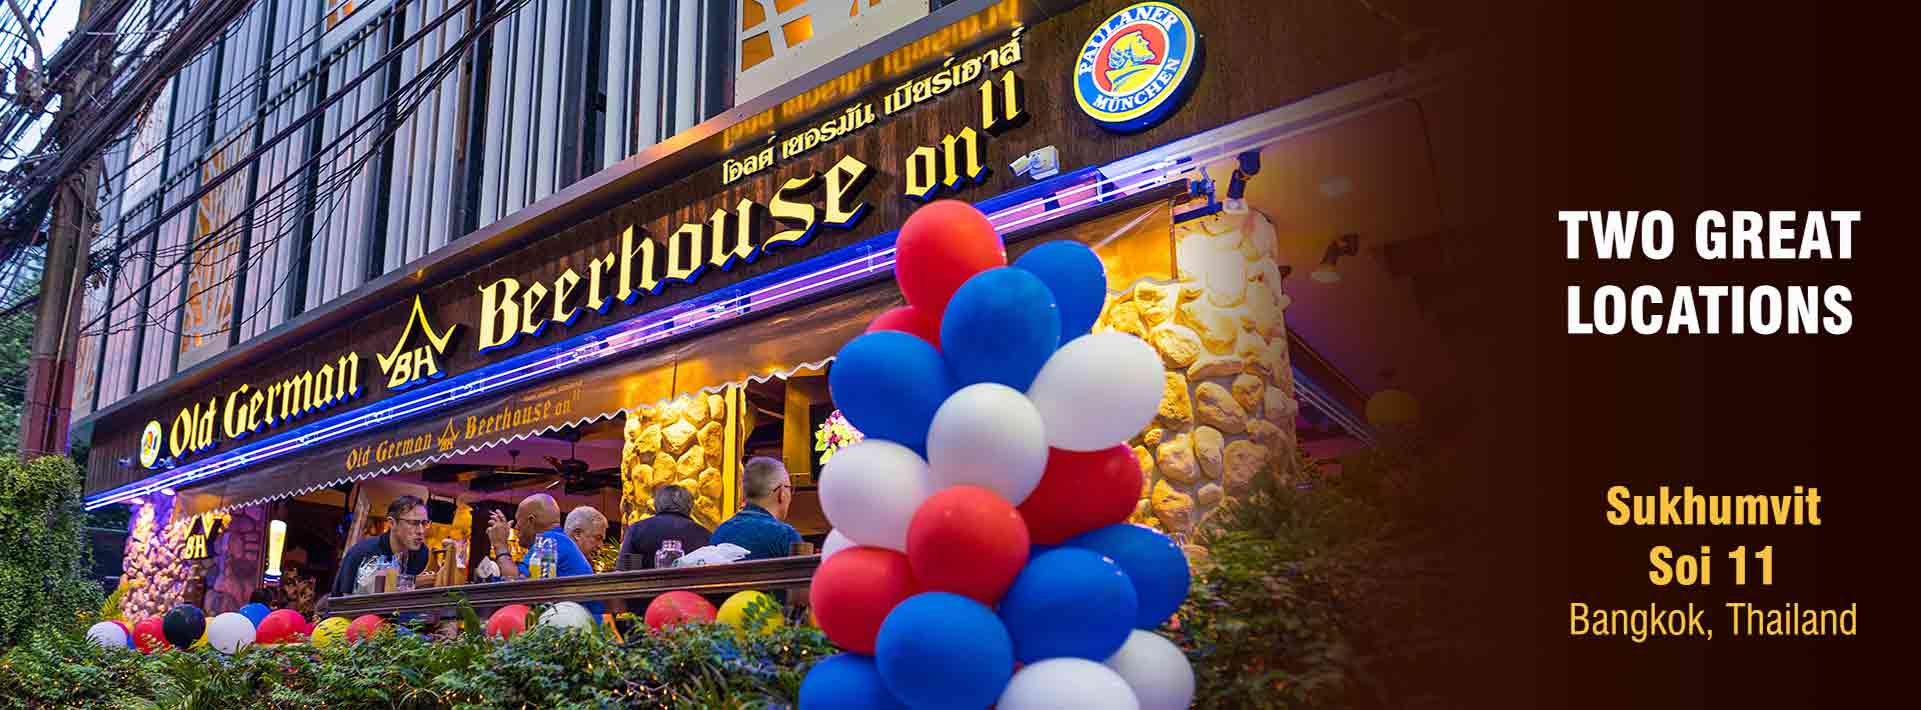 Old German Beerhouse - Soi 11 outside with balloons for party